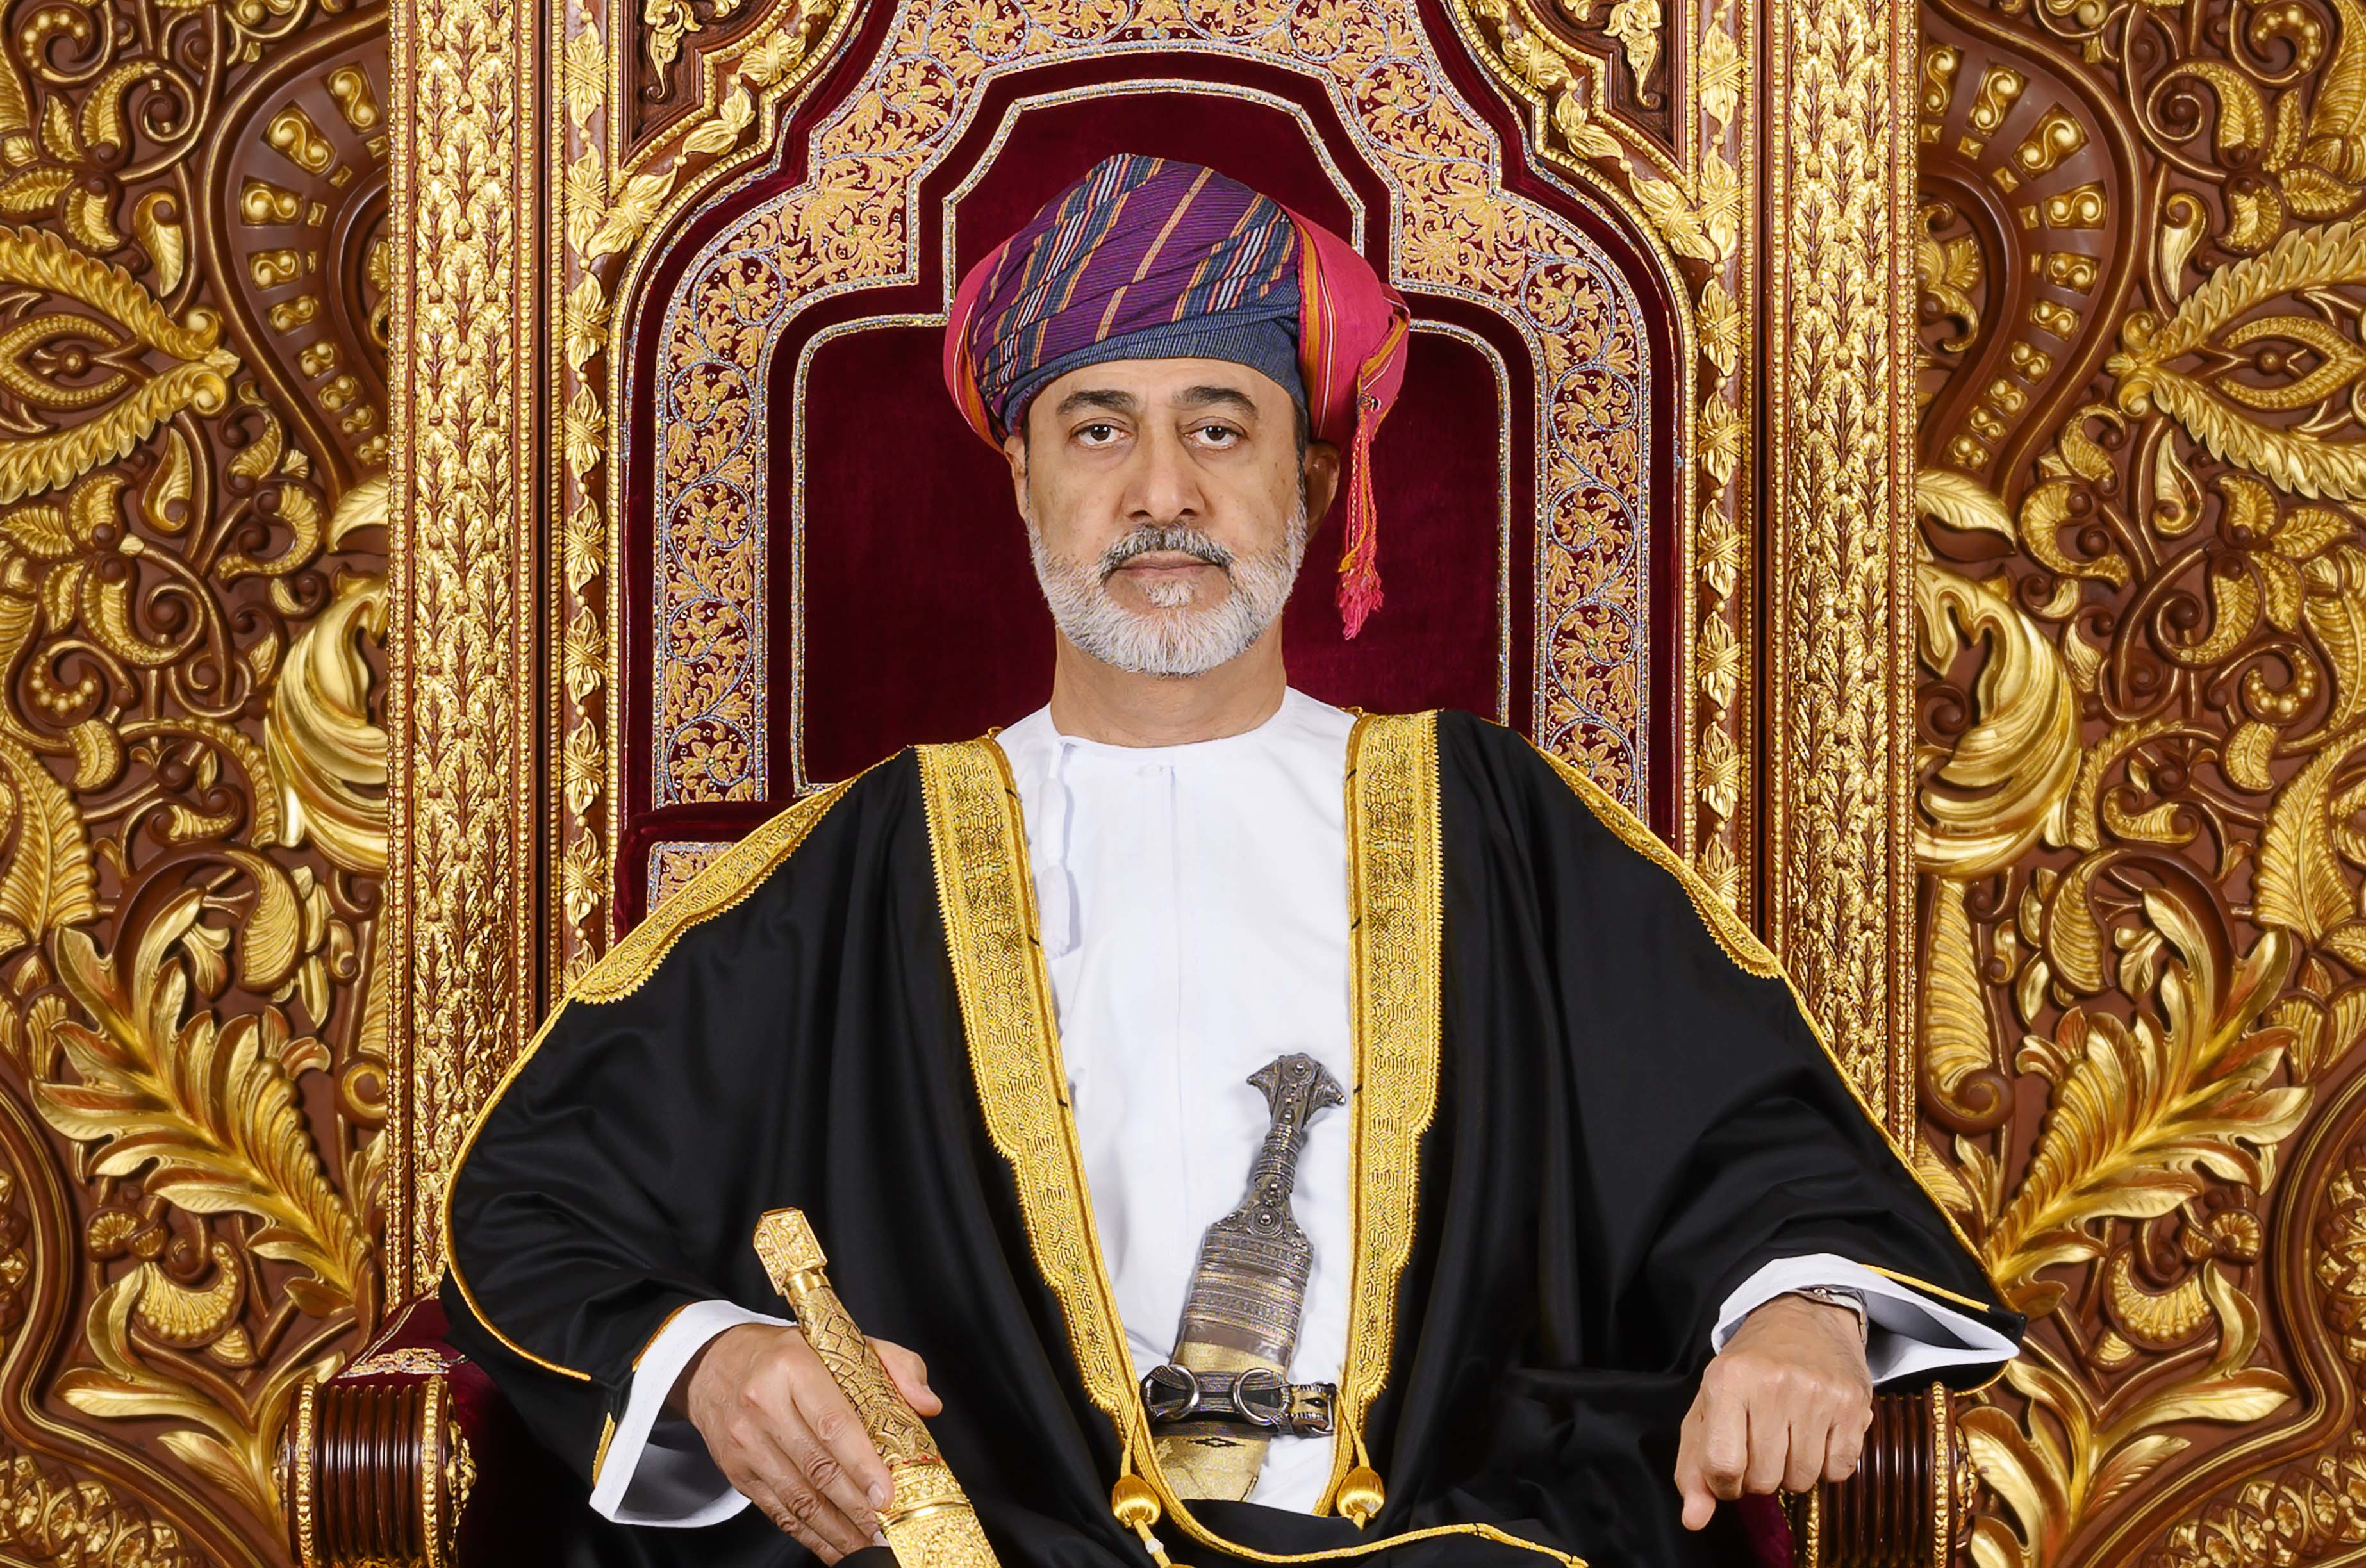 His Majesty issues 70 Royal Decrees over the last six months